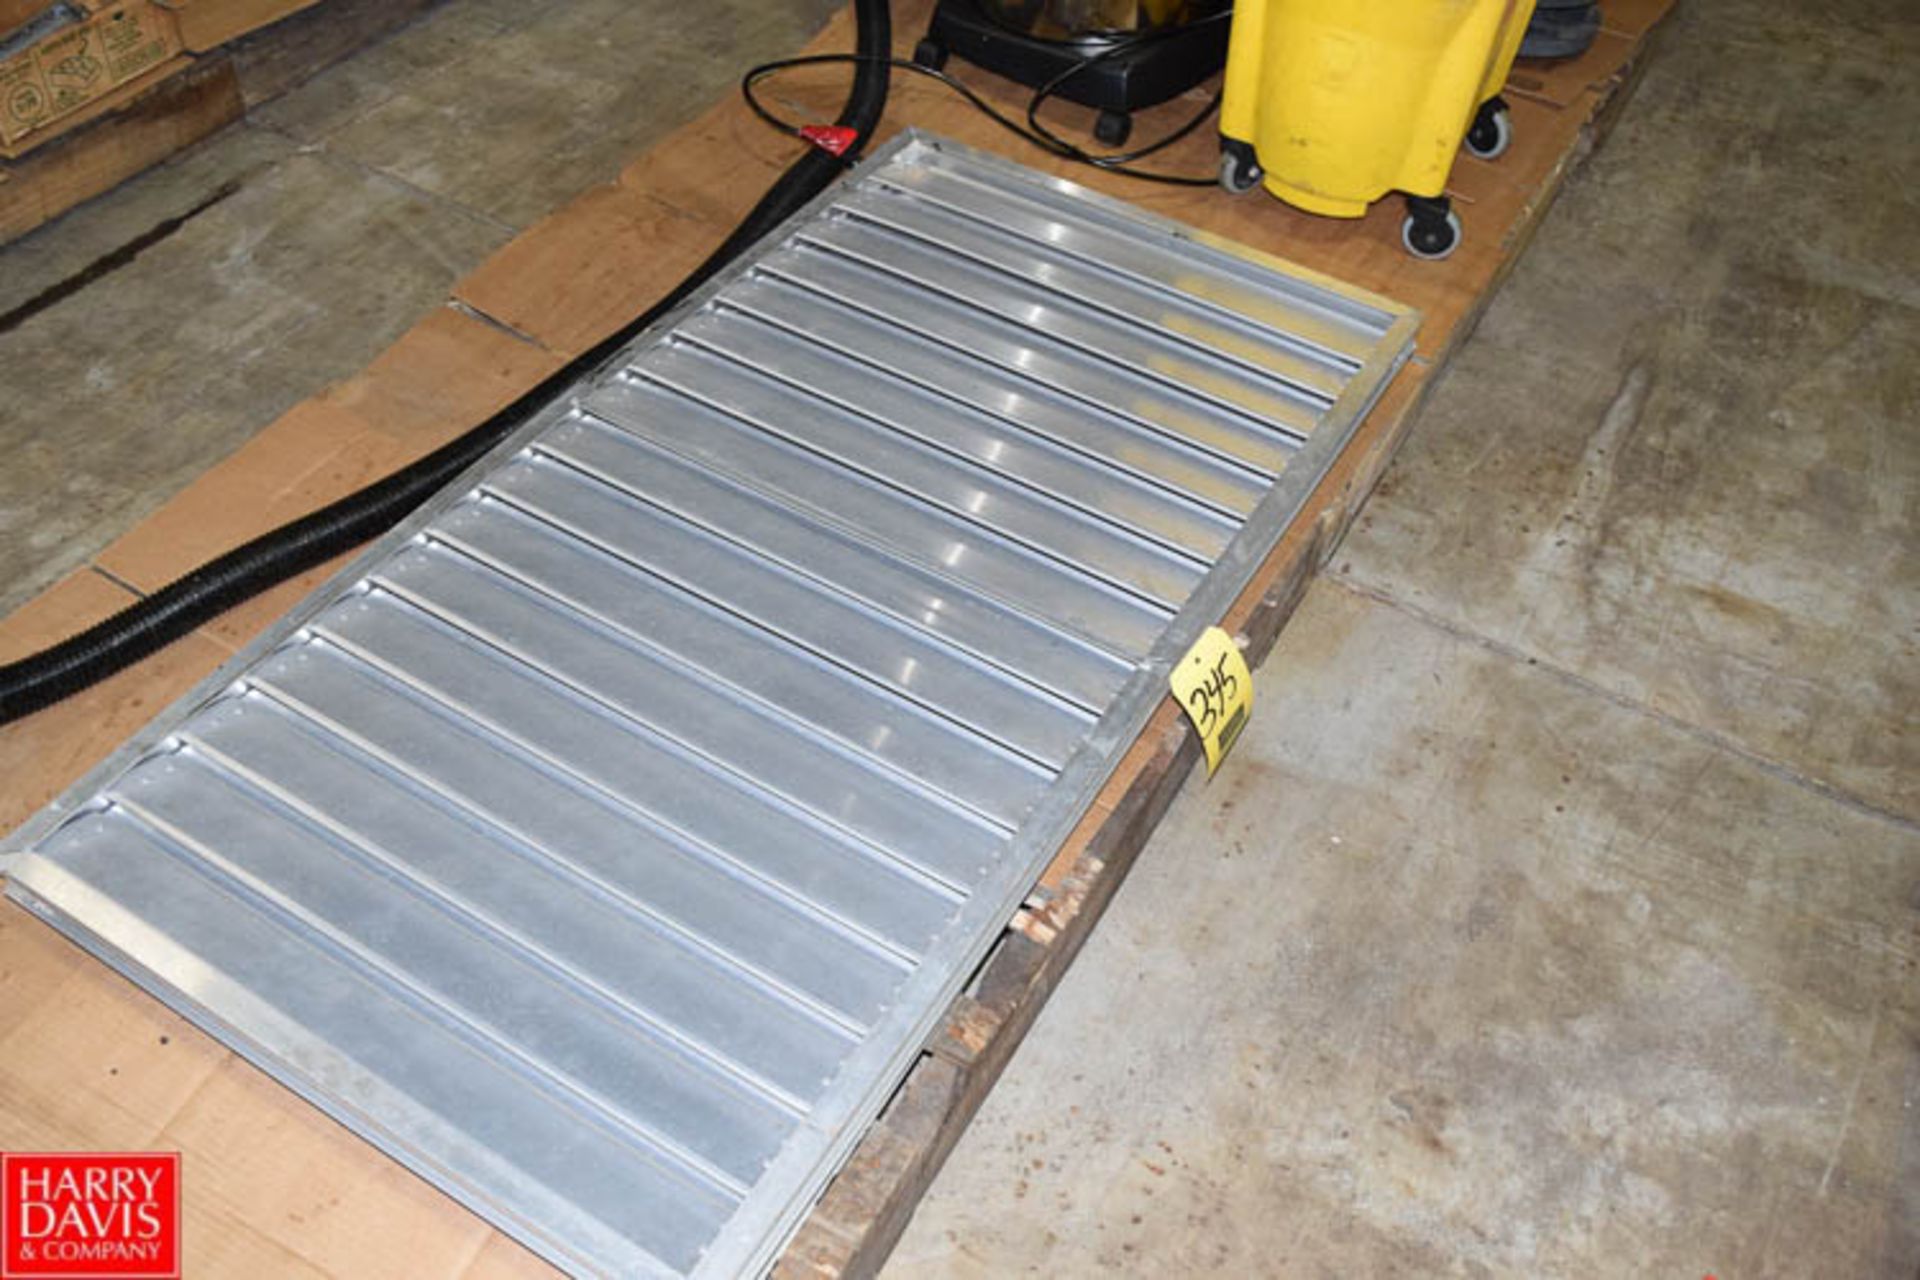 Aluminum Vent Covers - Rigging Fee: $ Please Contact Rigger for Pricing